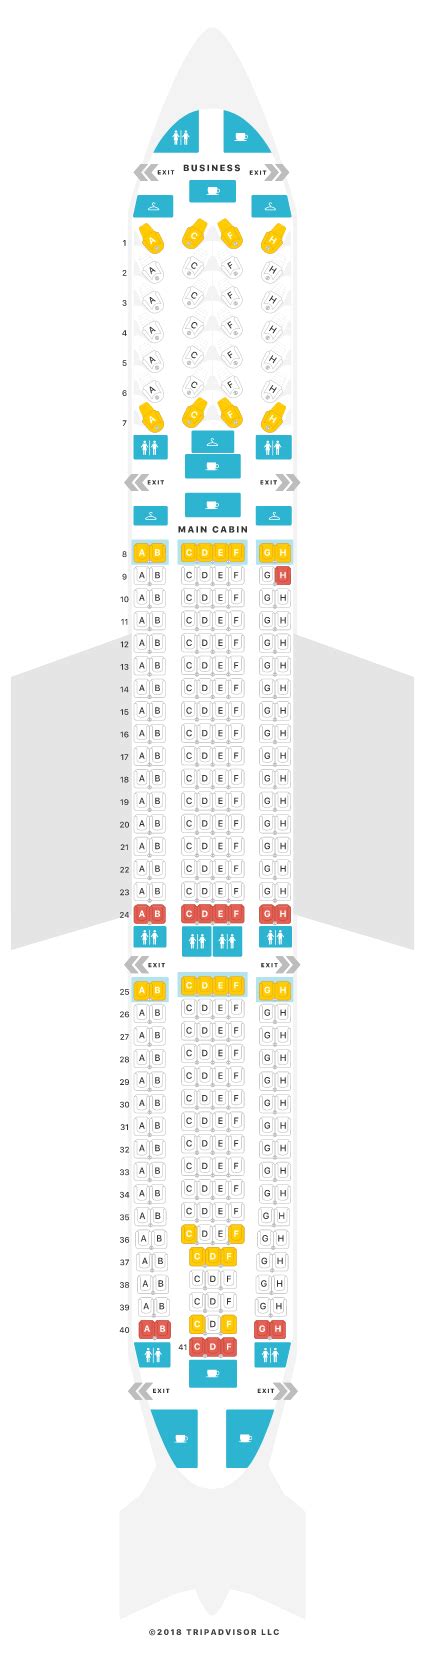 Seatguru aa. American Airlines Seat Maps. Overview; Planes & Seat Maps. Airbus A319 (319) Airbus A320 (320) Airbus A321 (321) Layout 1; Airbus A321 (321) Layout 2; ... SeatGuru was created to help travelers choose the best seats and in-flight amenities. Forum; Mobile; FAQ; Contact Us; Site Map; 